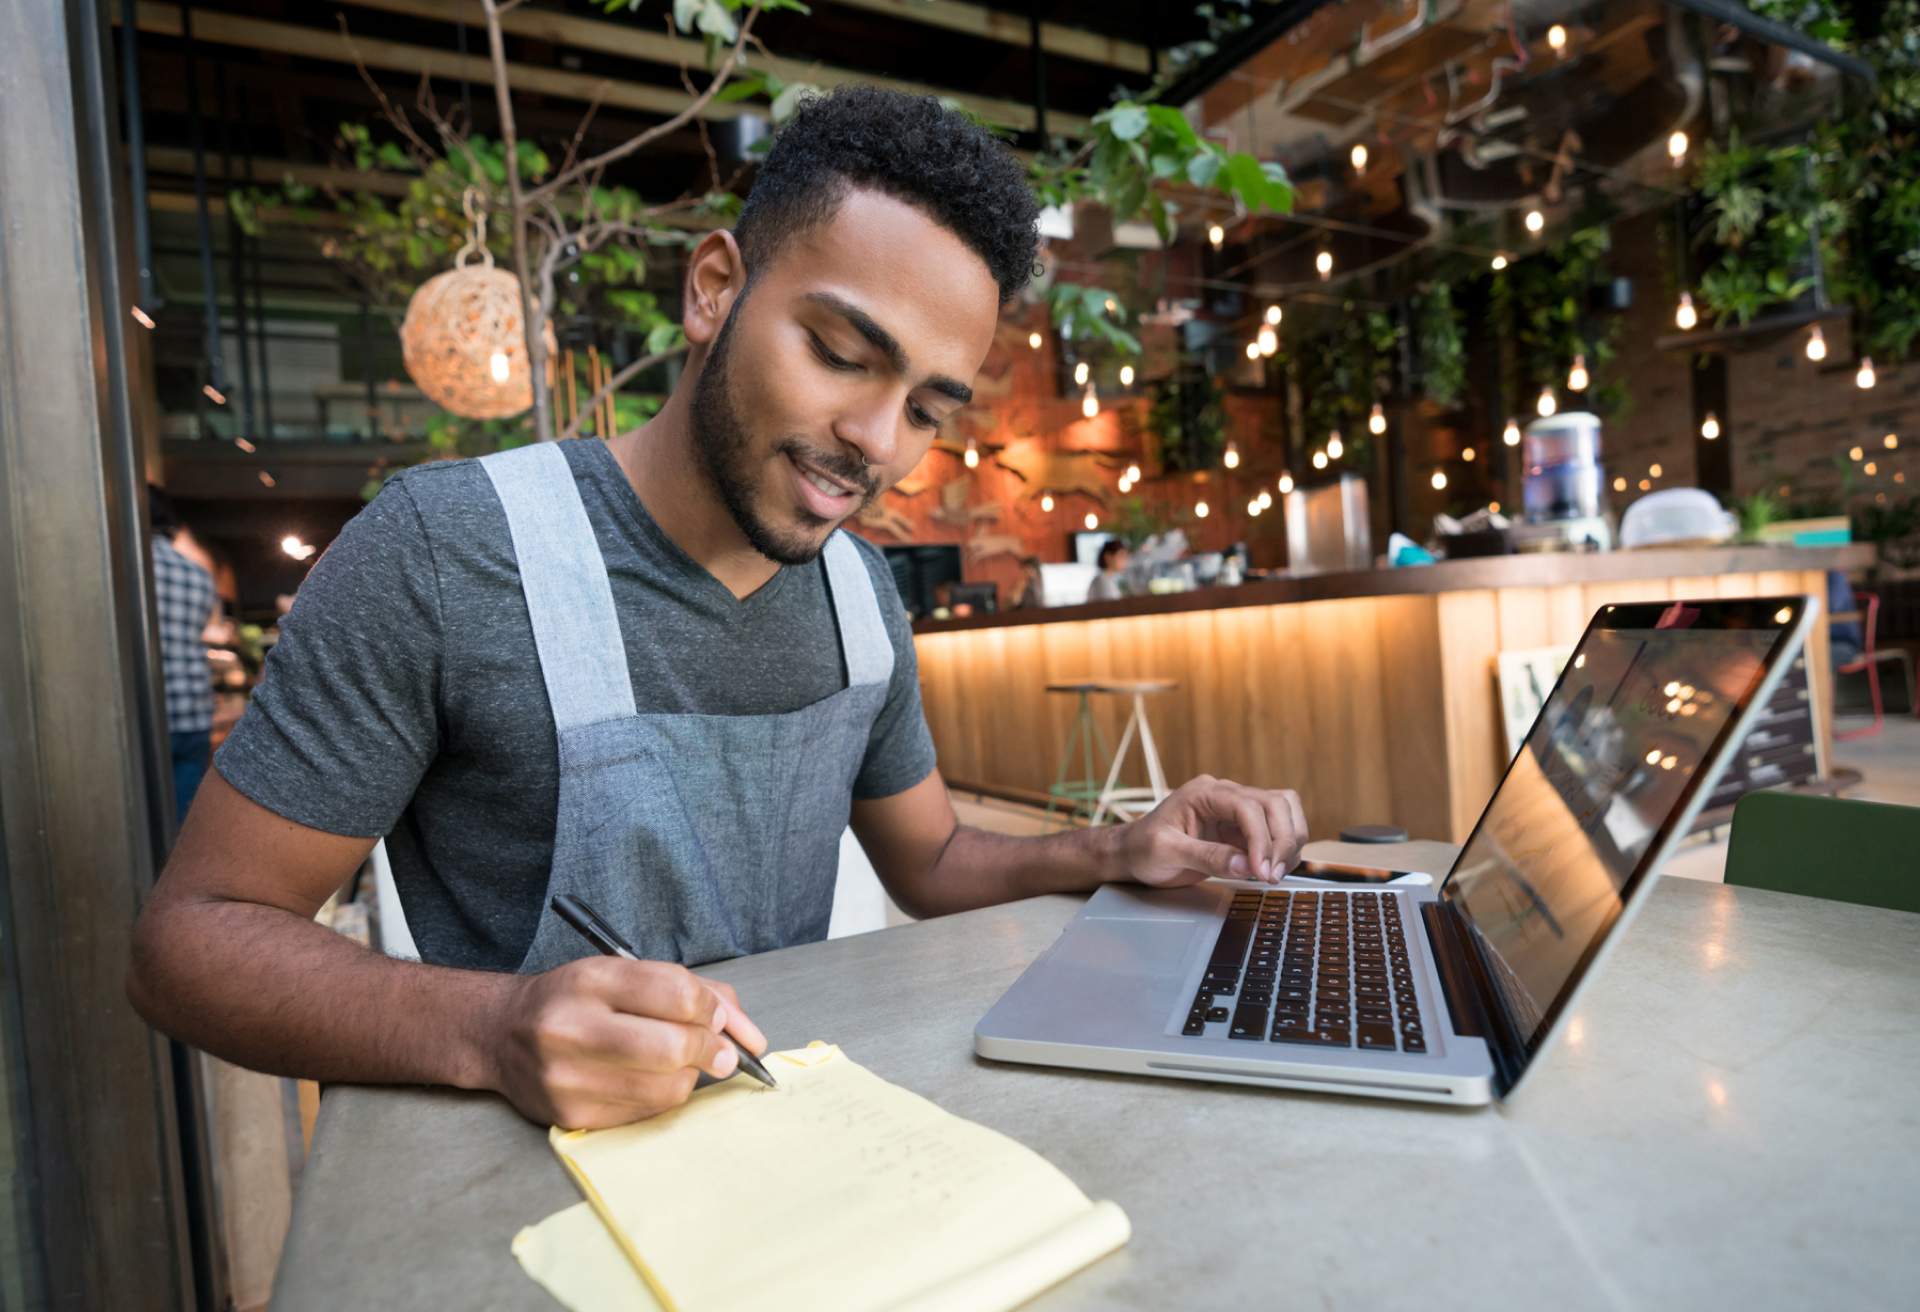 Image depicts a restaurant worker writing on a pad of paper while working on a computer. They are seated at a table in a restaurant.